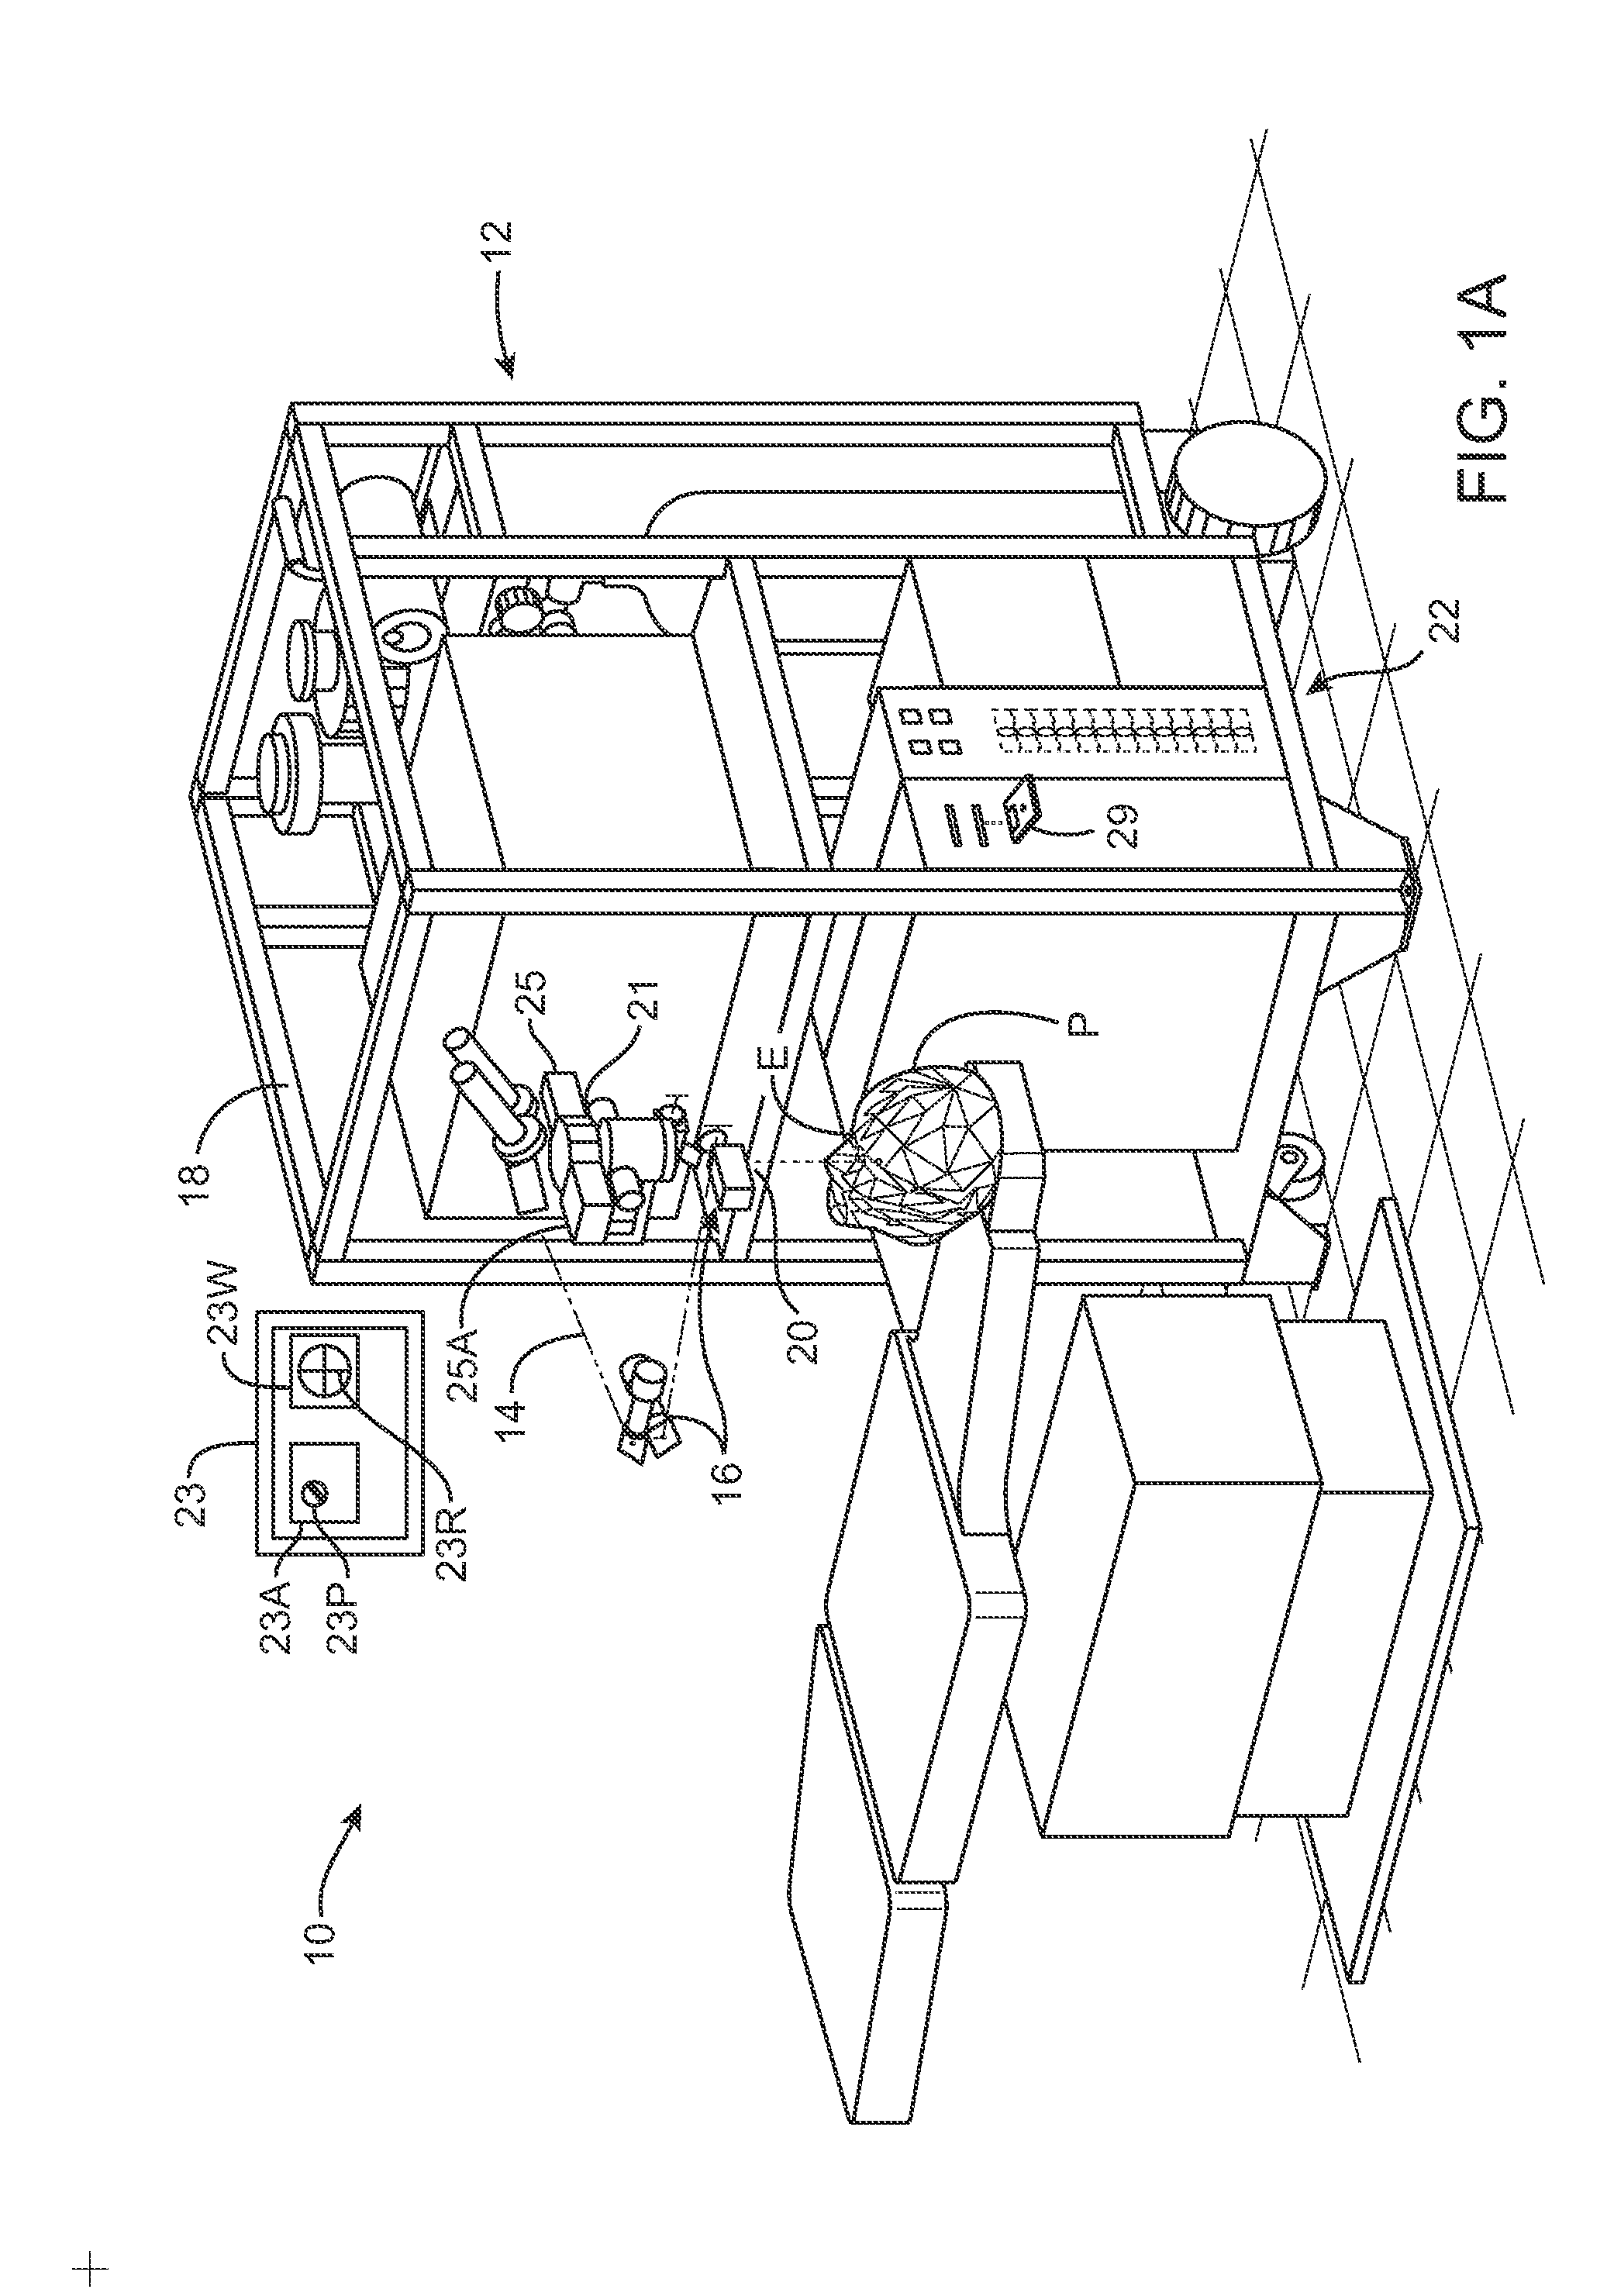 Customized laser epithelial ablation systems and methods